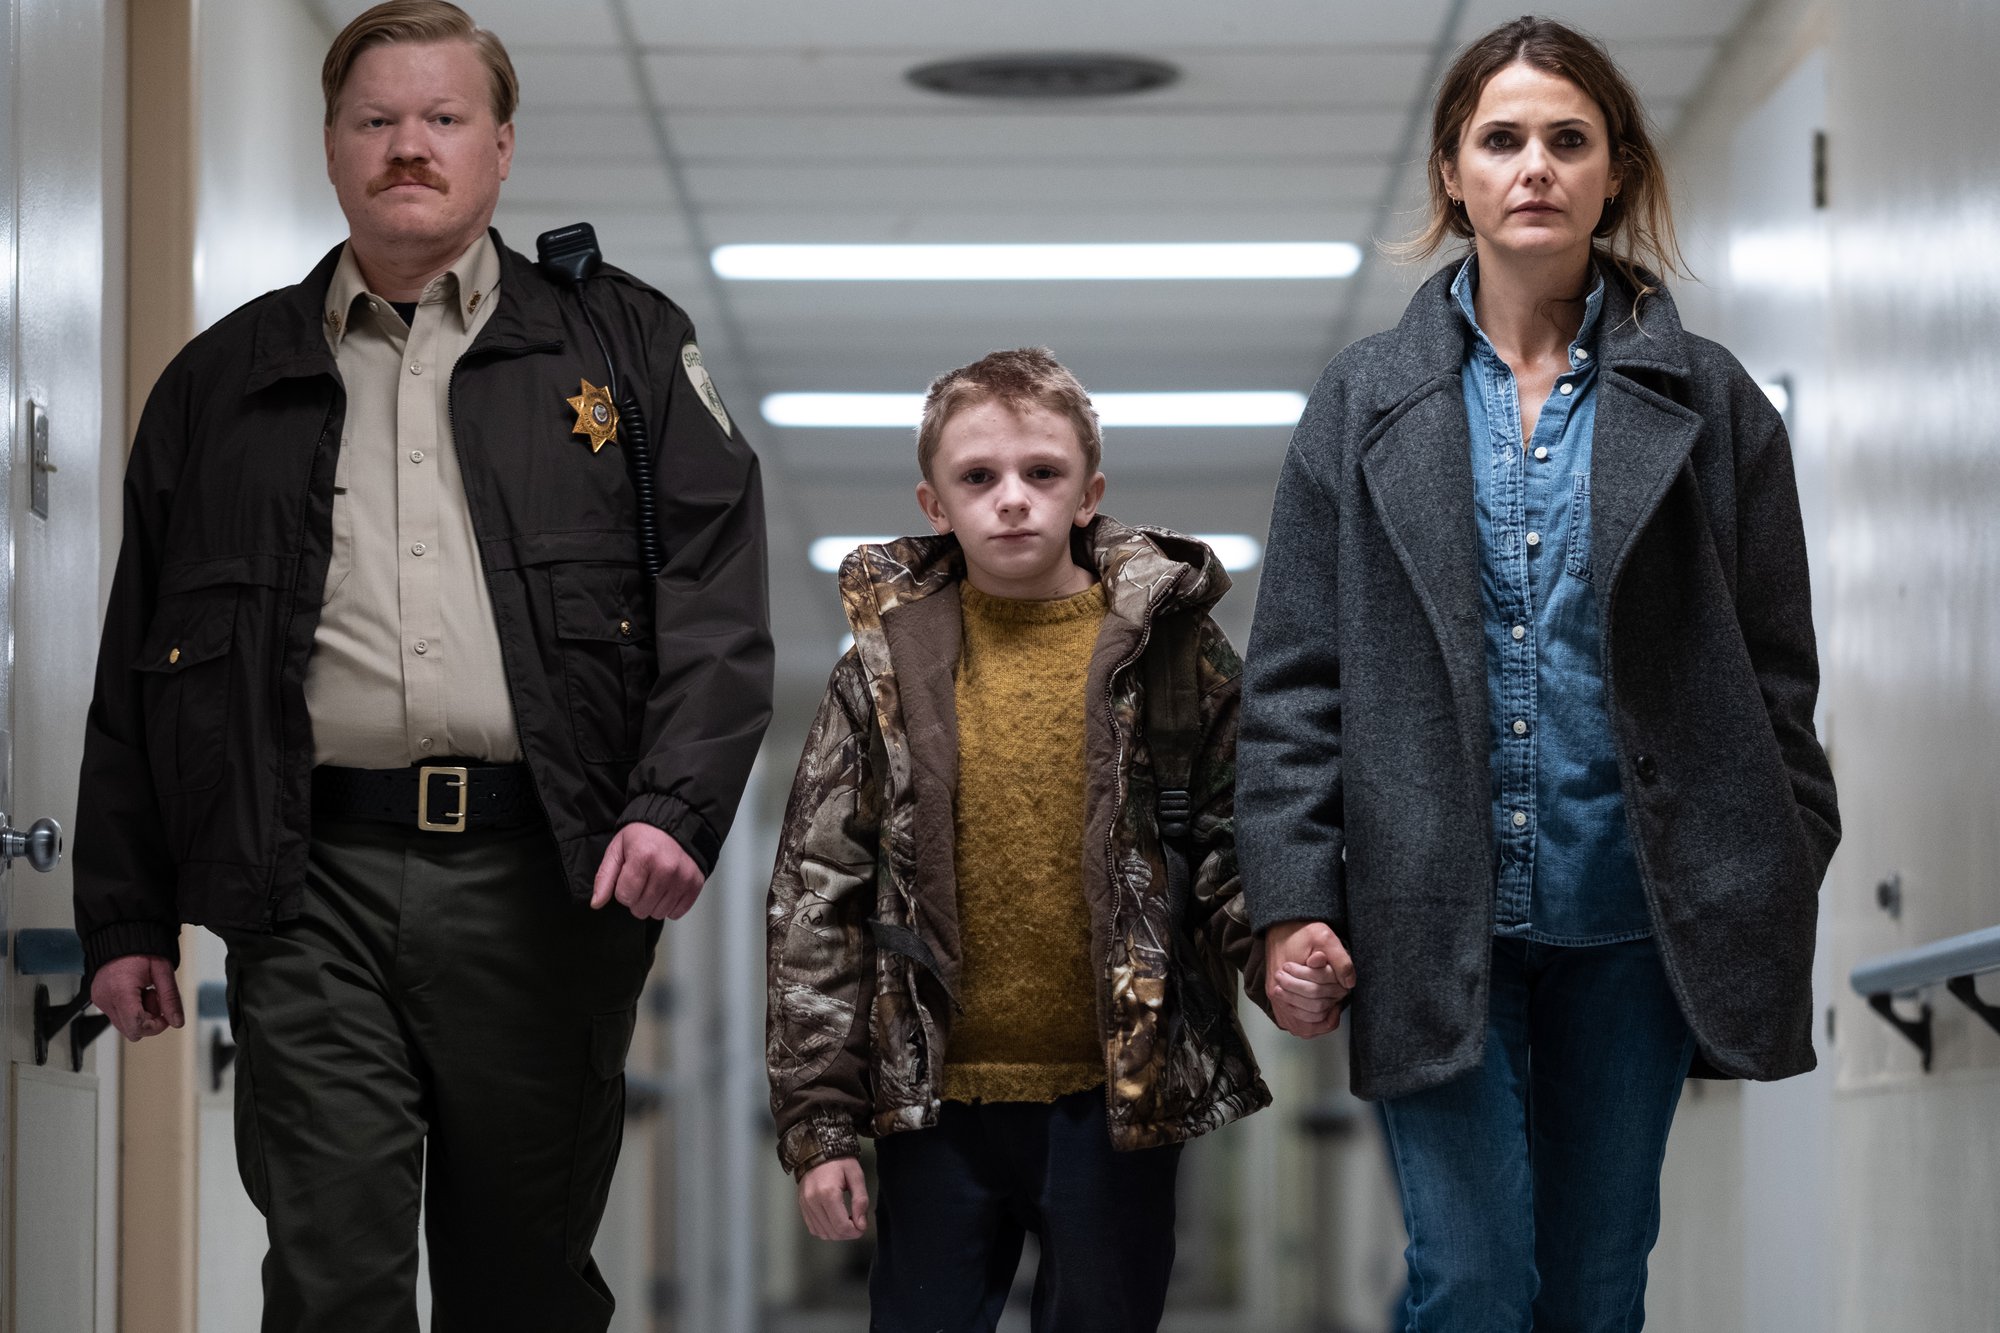 'Antlers' stars Jesse Plemons, Jeremy T. Thomas, and Keri Russell walking down a hallway in the hospital